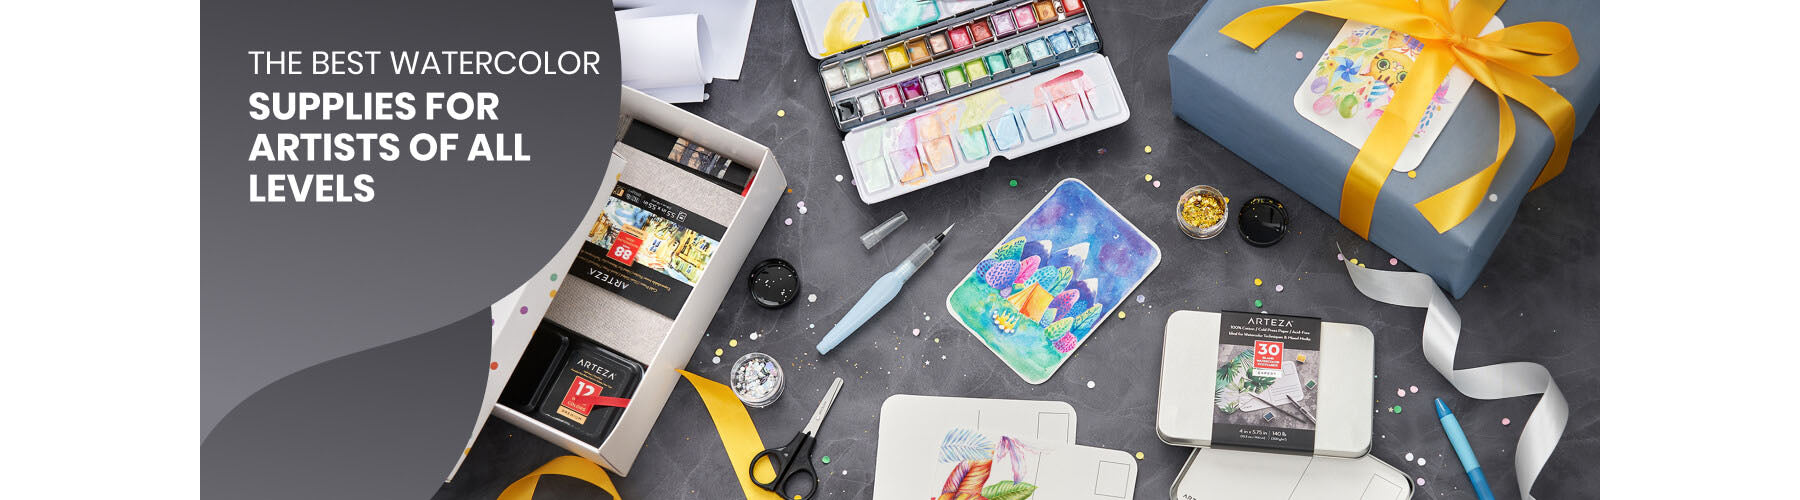 The Top 10 Must-Have Watercolor Painting Supplies